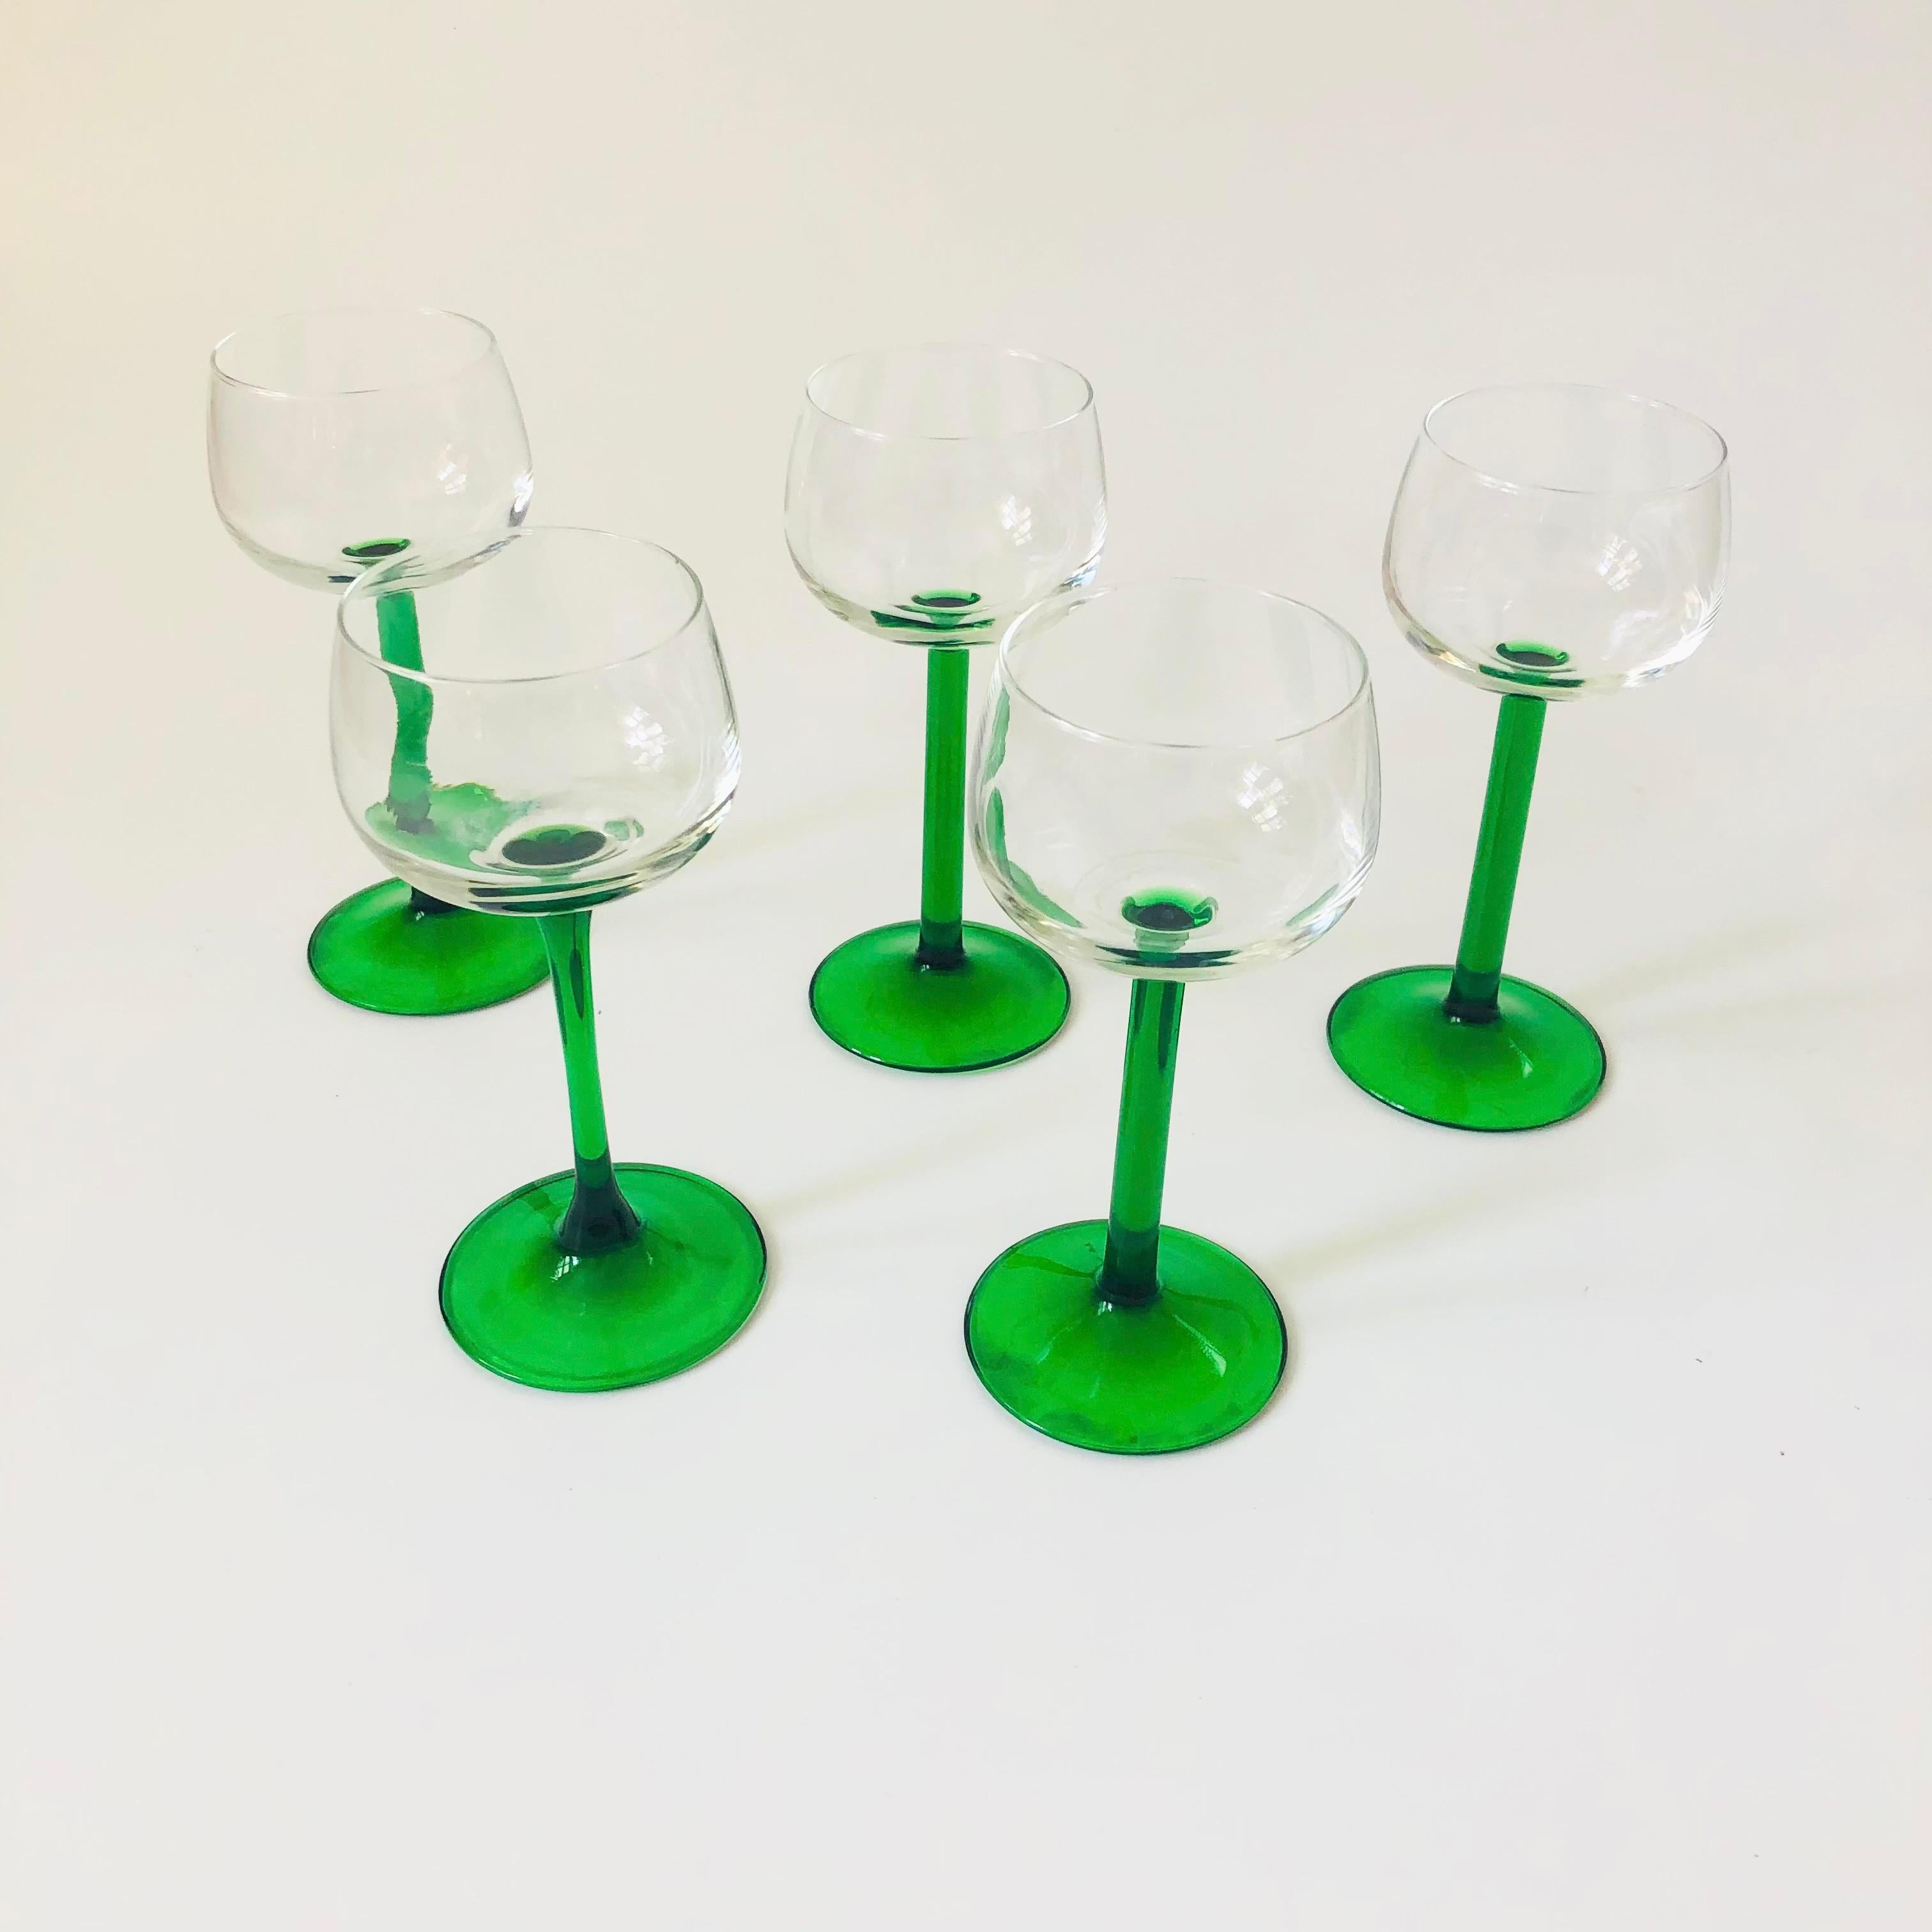 An elegant of set of 5 Mid Century coupe glasses with green stems.Perfect for champagne. Made in France by Luminarc.

